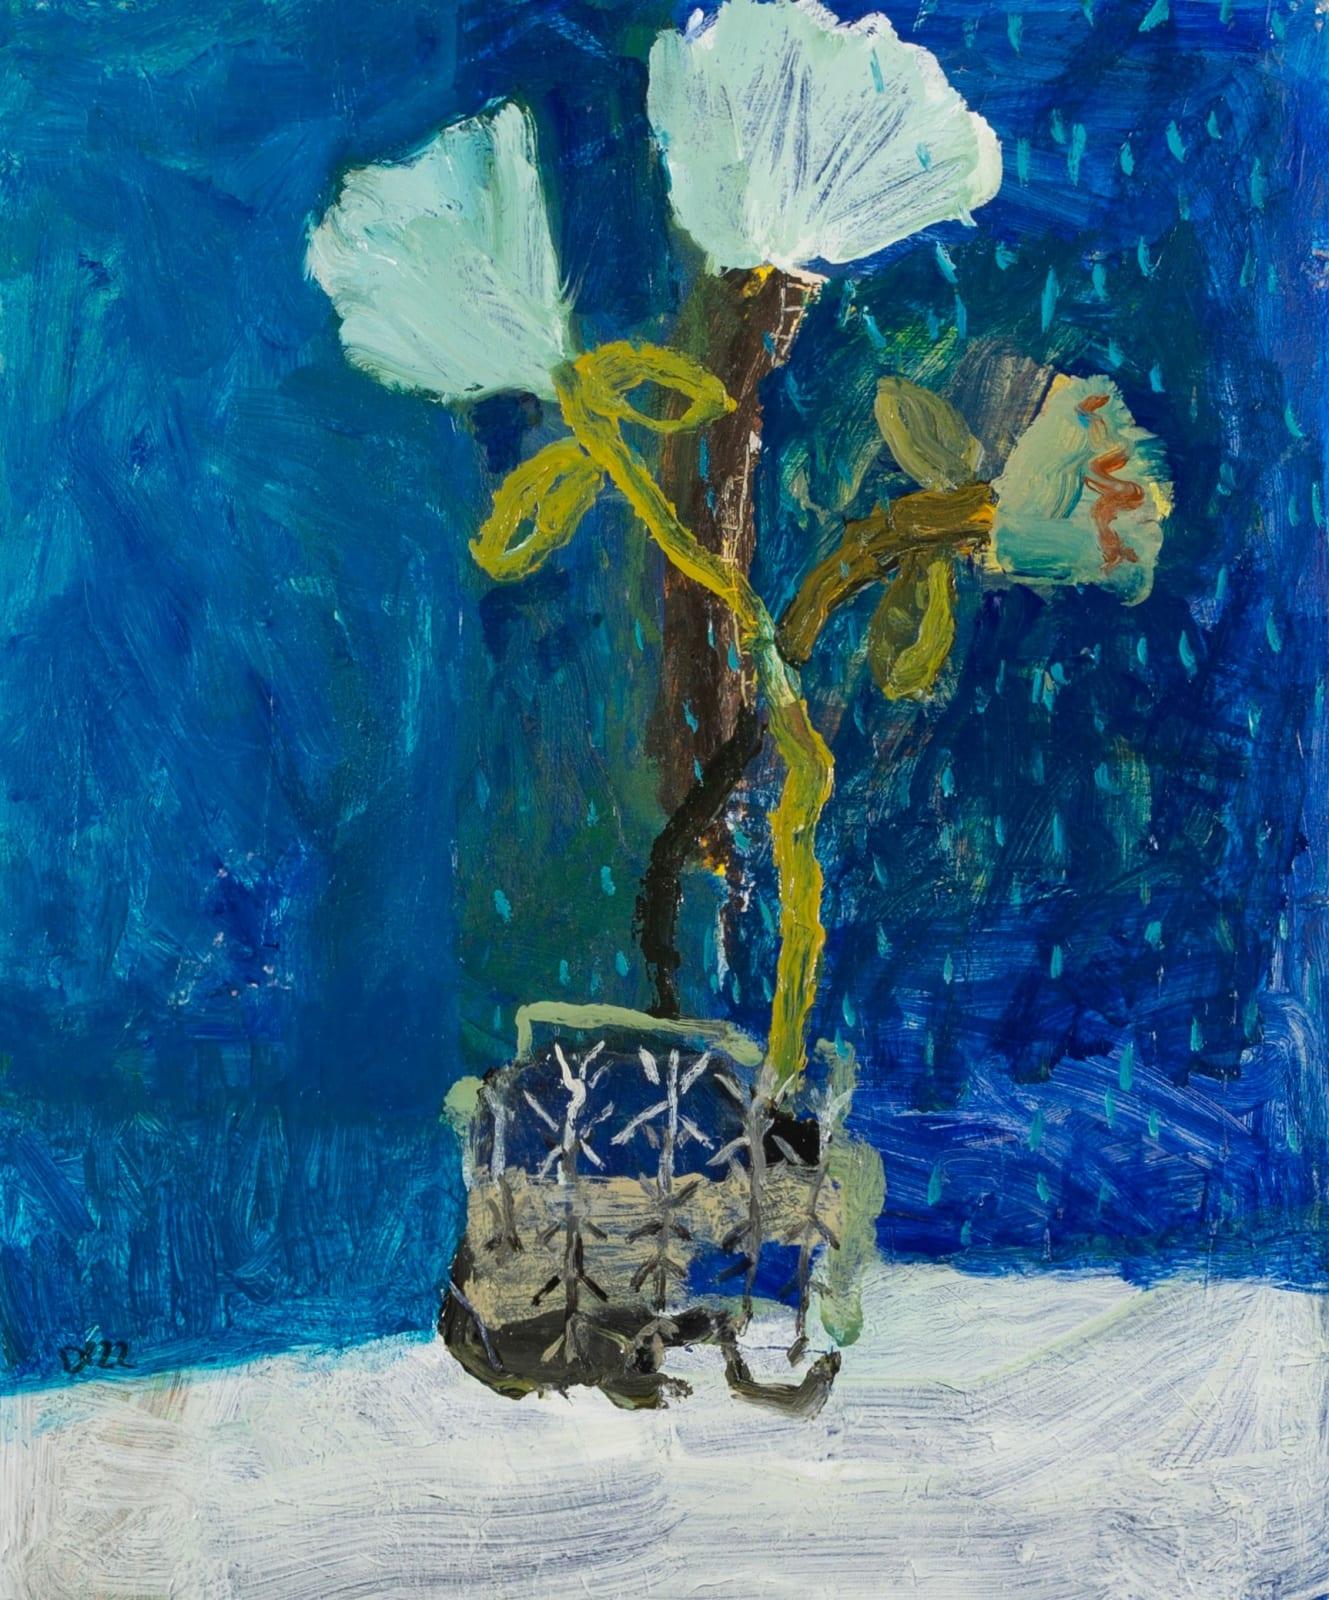 Acrylic on Board 'Campanula' Painting by David Pearce B. 1963, 2022

Additional information:
Medium: Acrylic on board
Dimensions: 60 x 50 cm
23 5/8 x 19 3/4 in
Signed and dated.

David Pearce is a British painter.

After travelling widely throughout